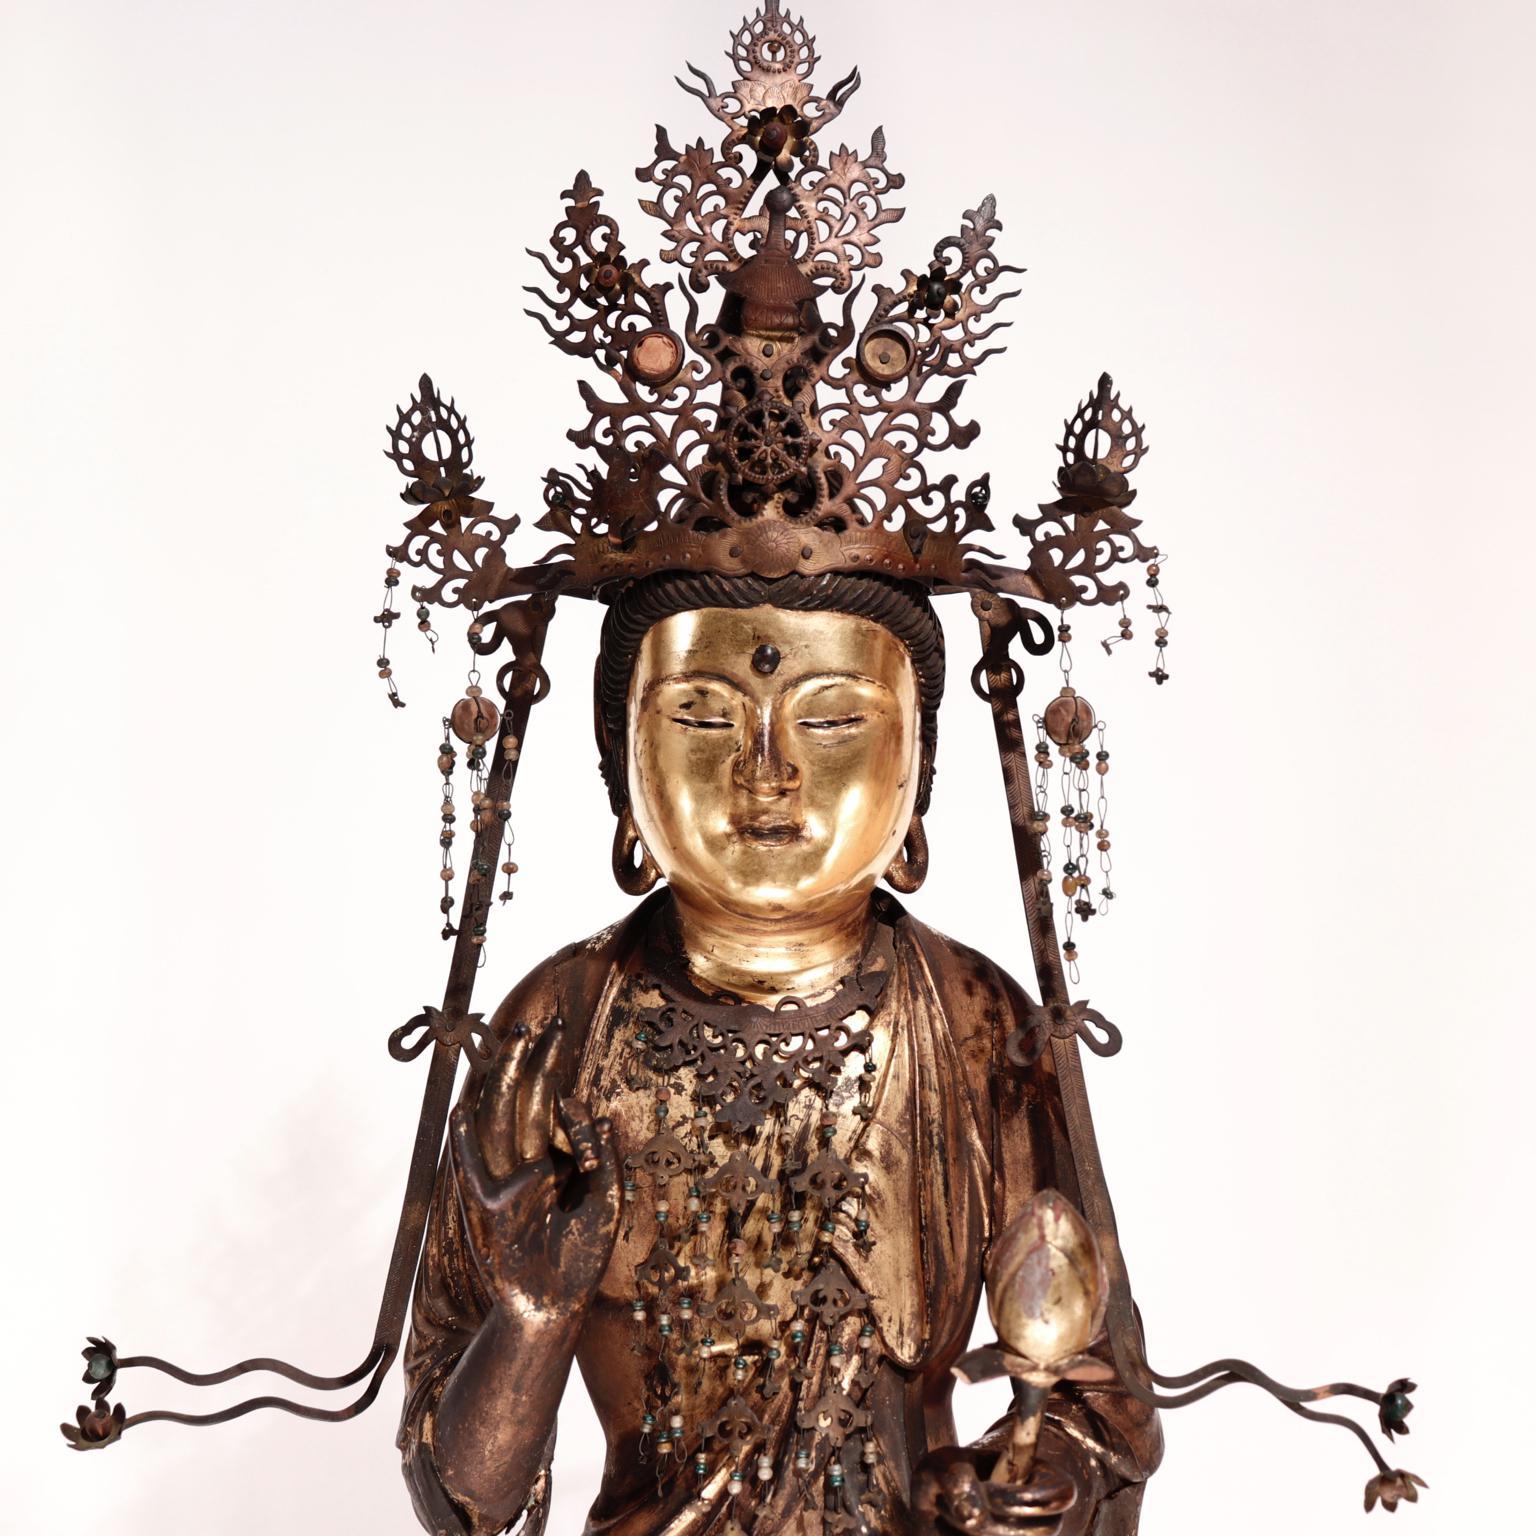 Japanese Buddhist assembled wood sculpture of Kannon-Bosatsu (Avalokitesvara), the God of Compassion, standing male figure with abundant cloak drapery including the pendant wrapped sleeves, standing on a lotus base on a rocky outcropping, the left